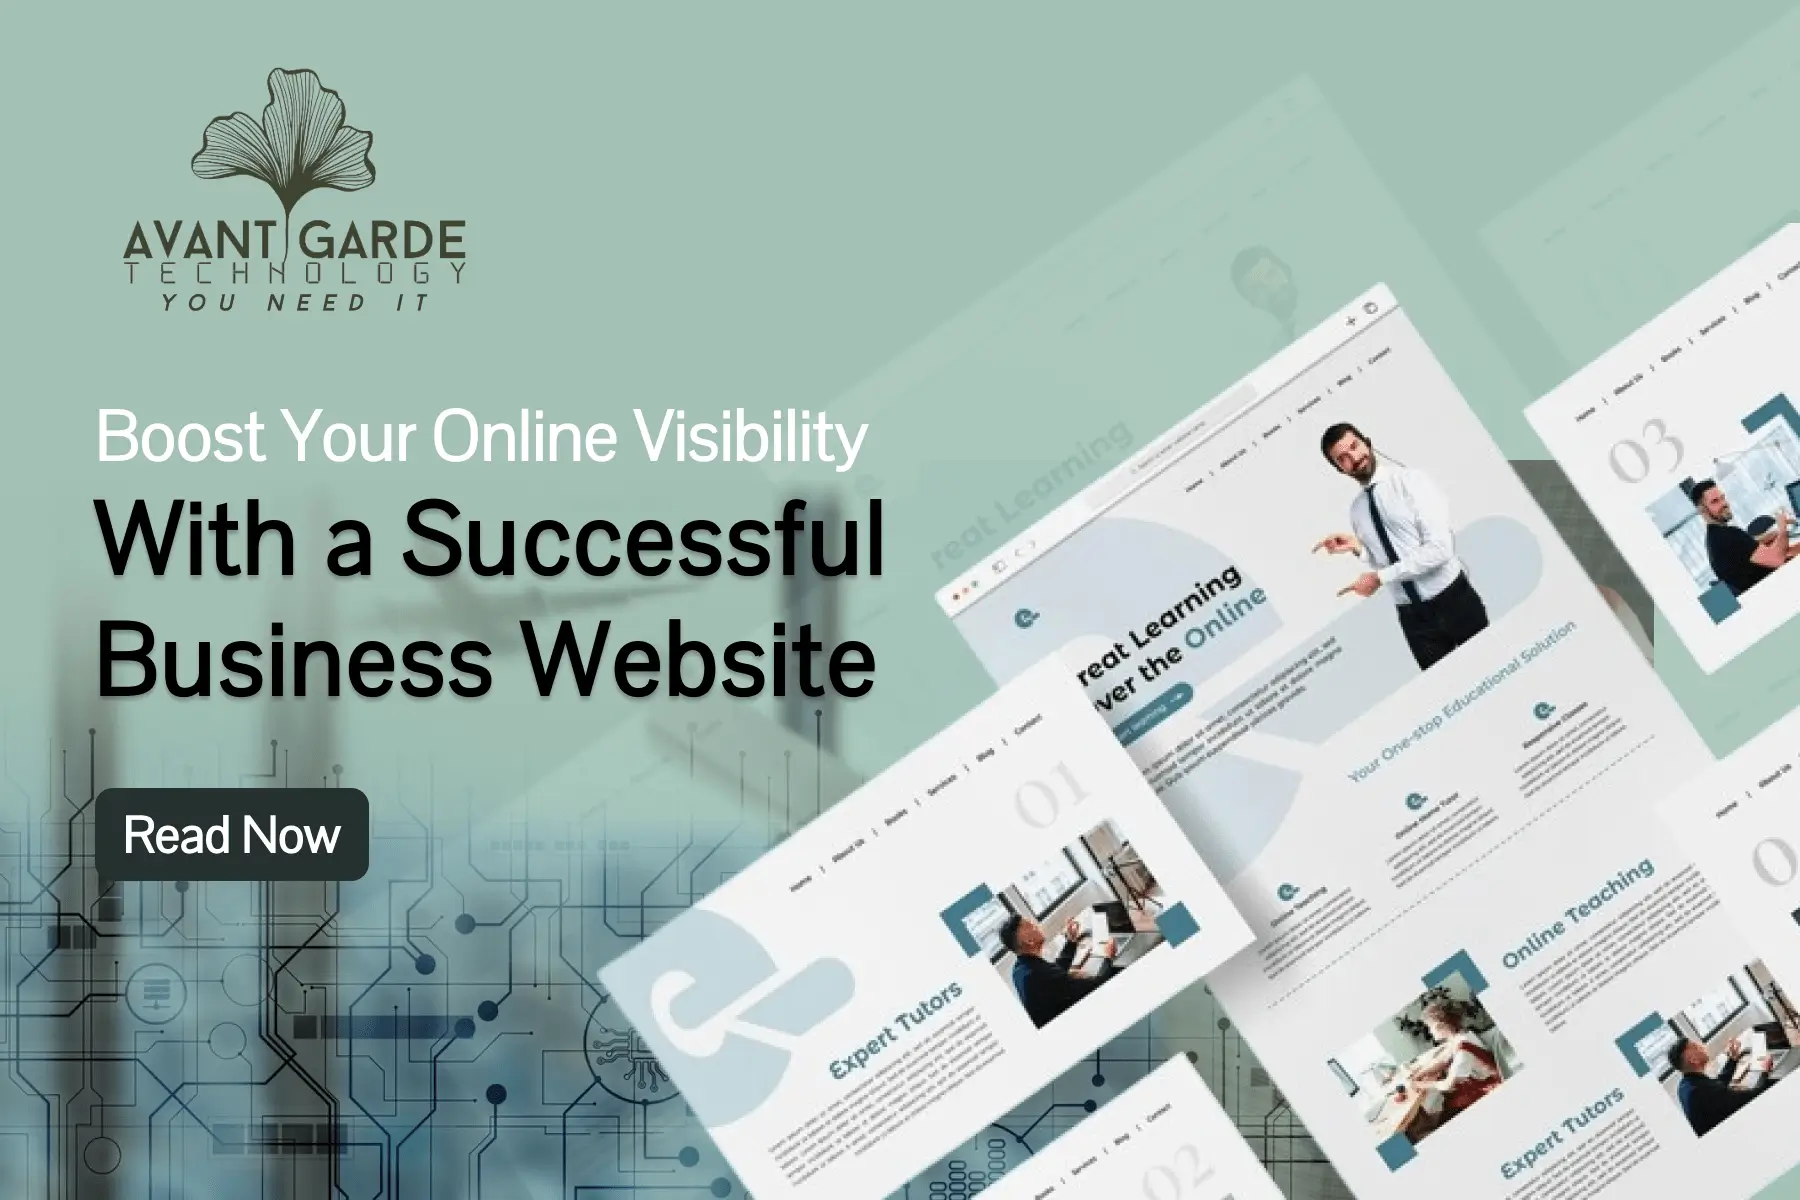 Boost Your Online Visibility With a Successful Business Website